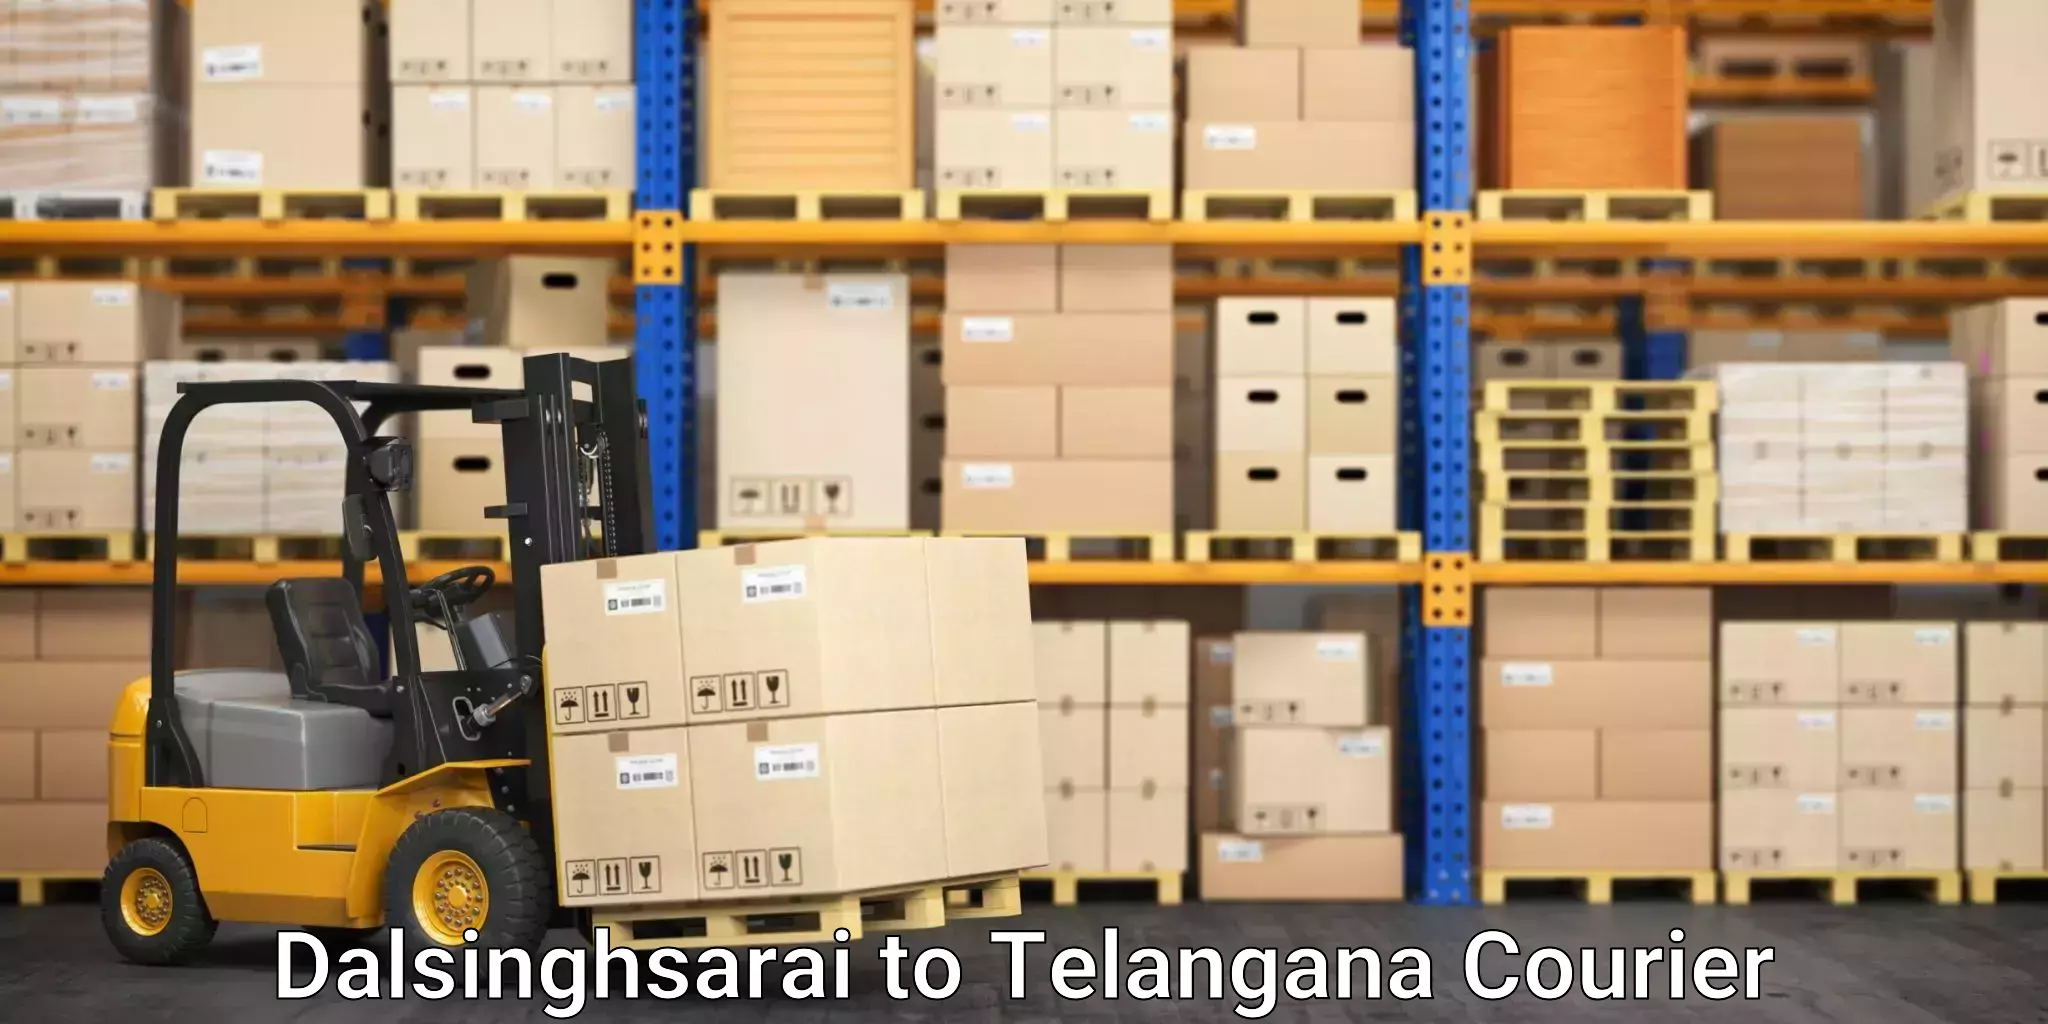 Budget-friendly moving services Dalsinghsarai to Manneguda